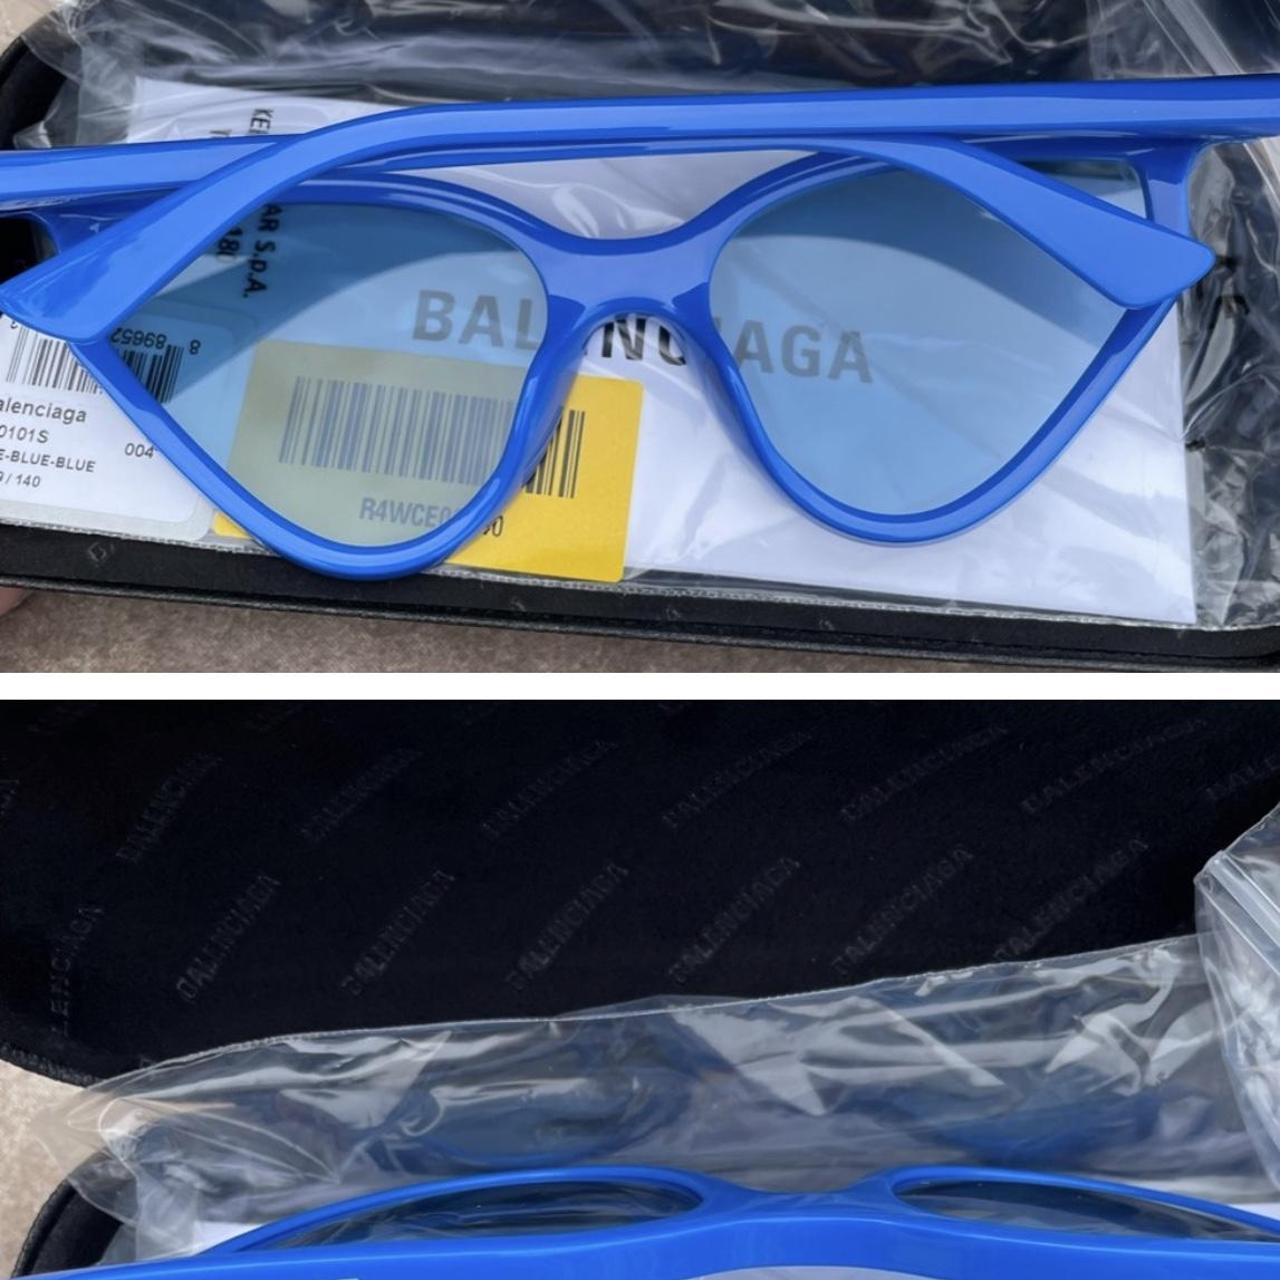 Product Image 4 - Balenciaga Sunglasses
New with tags 
Comes